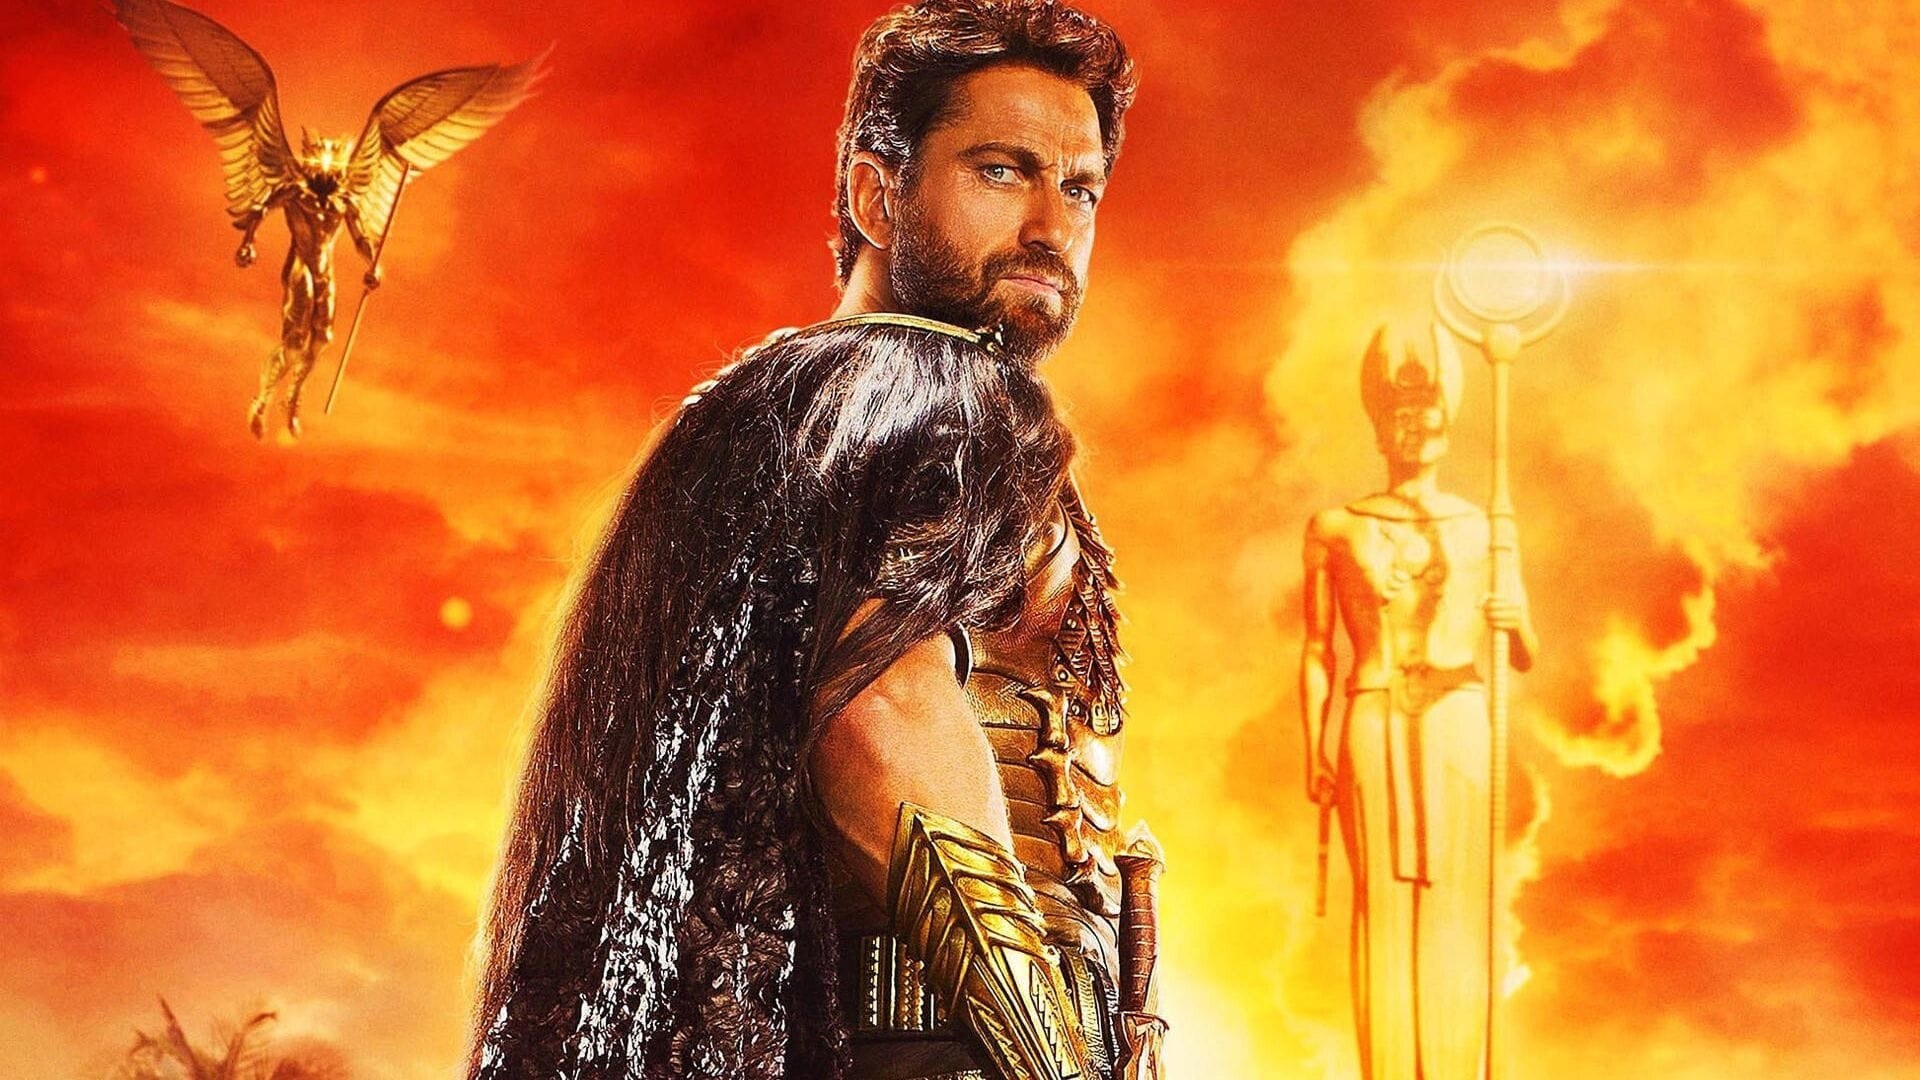 Gods of Egypt (Movie): Gerard Butler as Set, A Scottish actor and film producer, A 2016 fantasy action film. 1920x1080 Full HD Wallpaper.